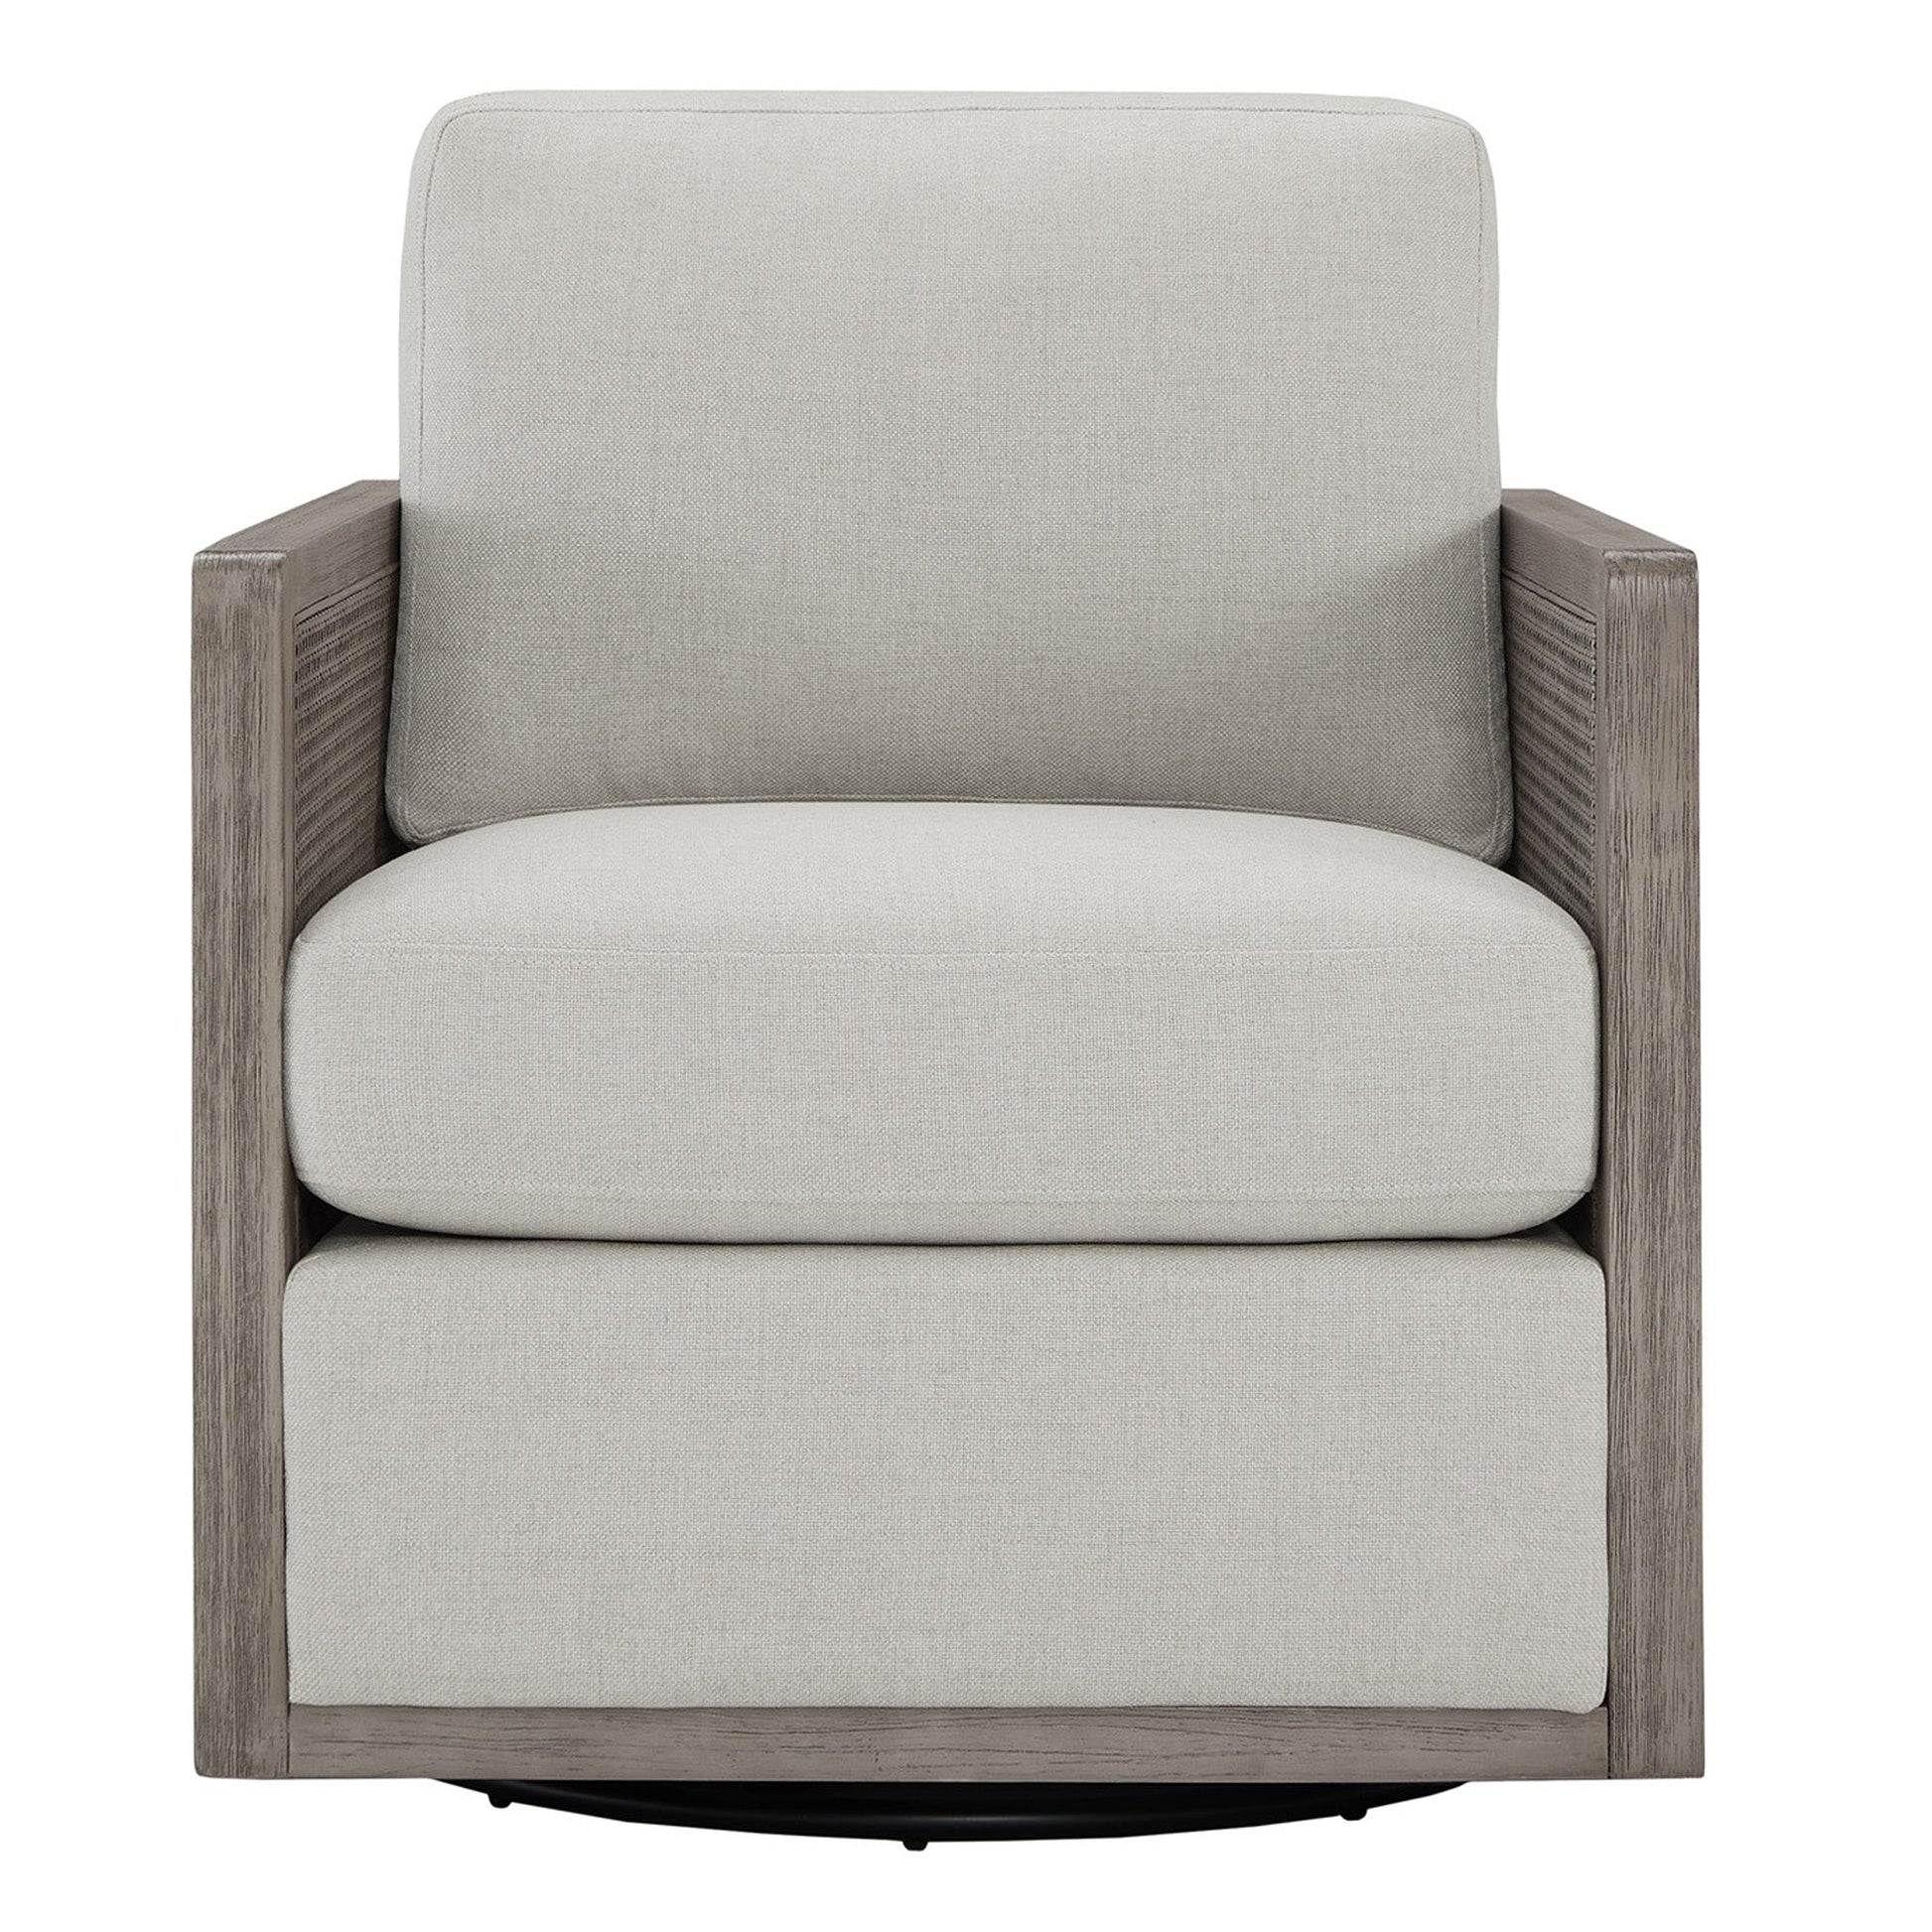 CHITA LIVING-Milly Classic Cane Swivel Armchair-Accent Chair-Natural-Cream-